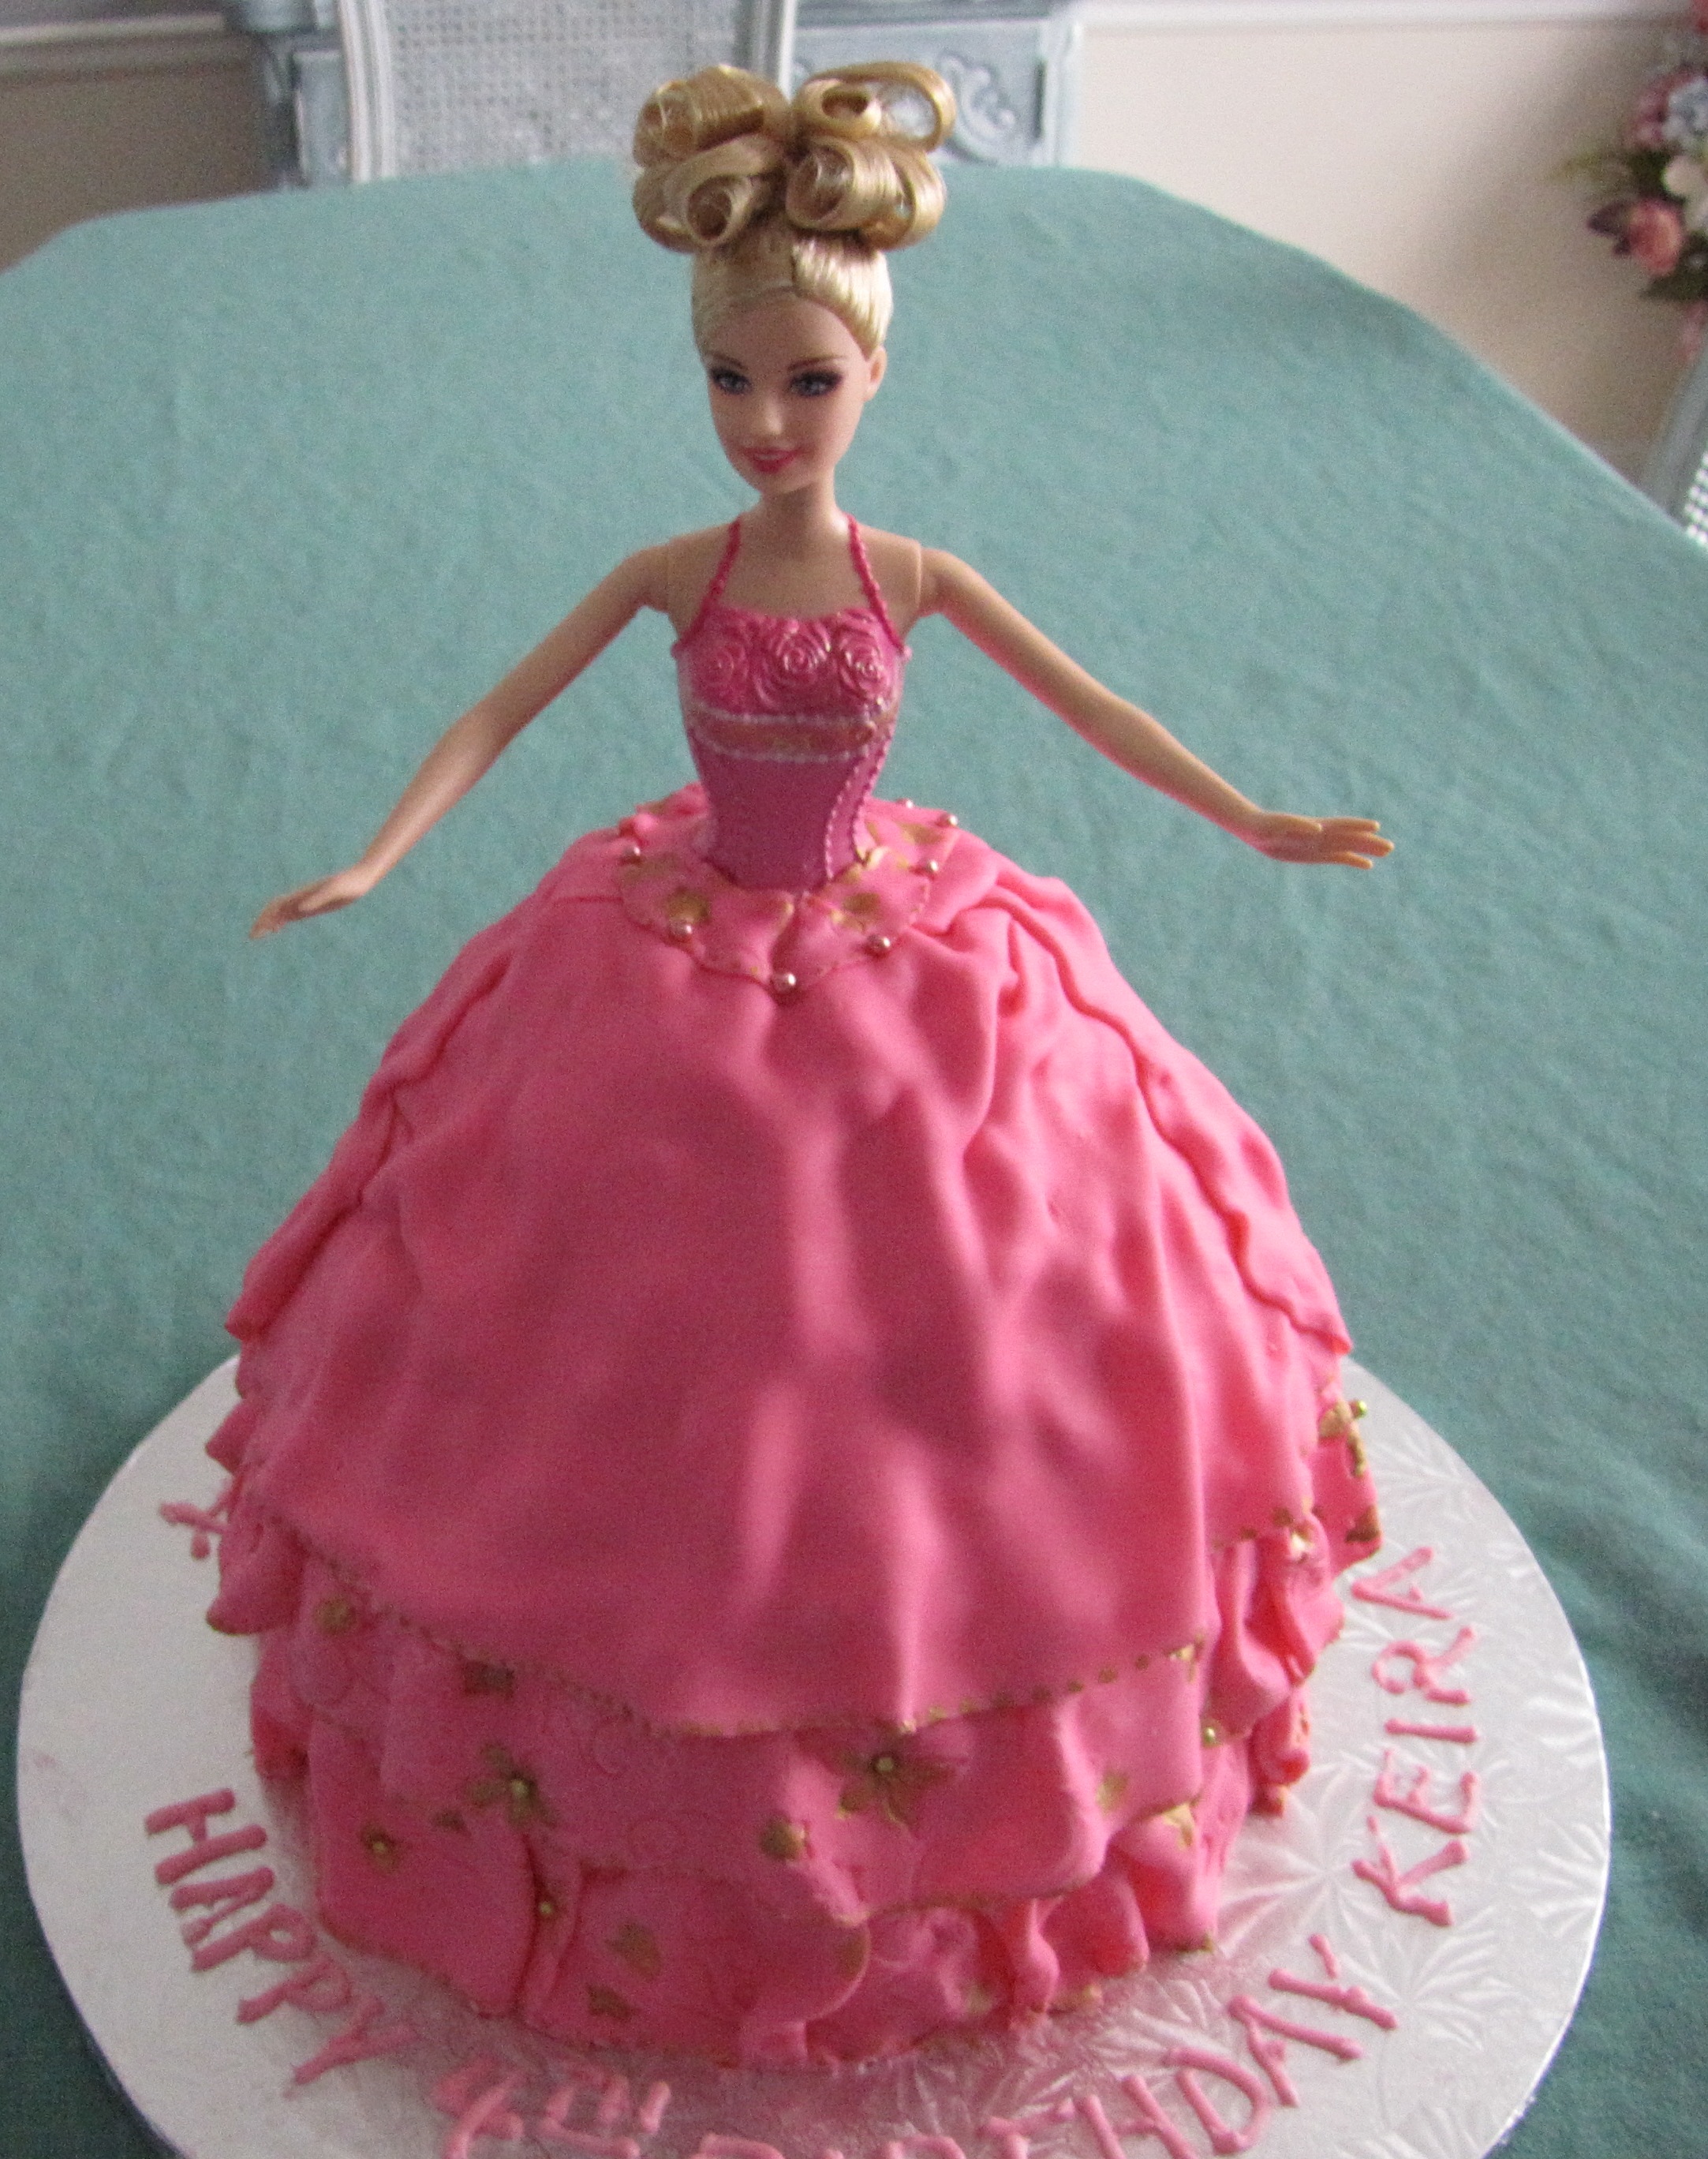 Barbie Cakes Images - Barbie Theme Cake Design , HD Wallpaper & Backgrounds